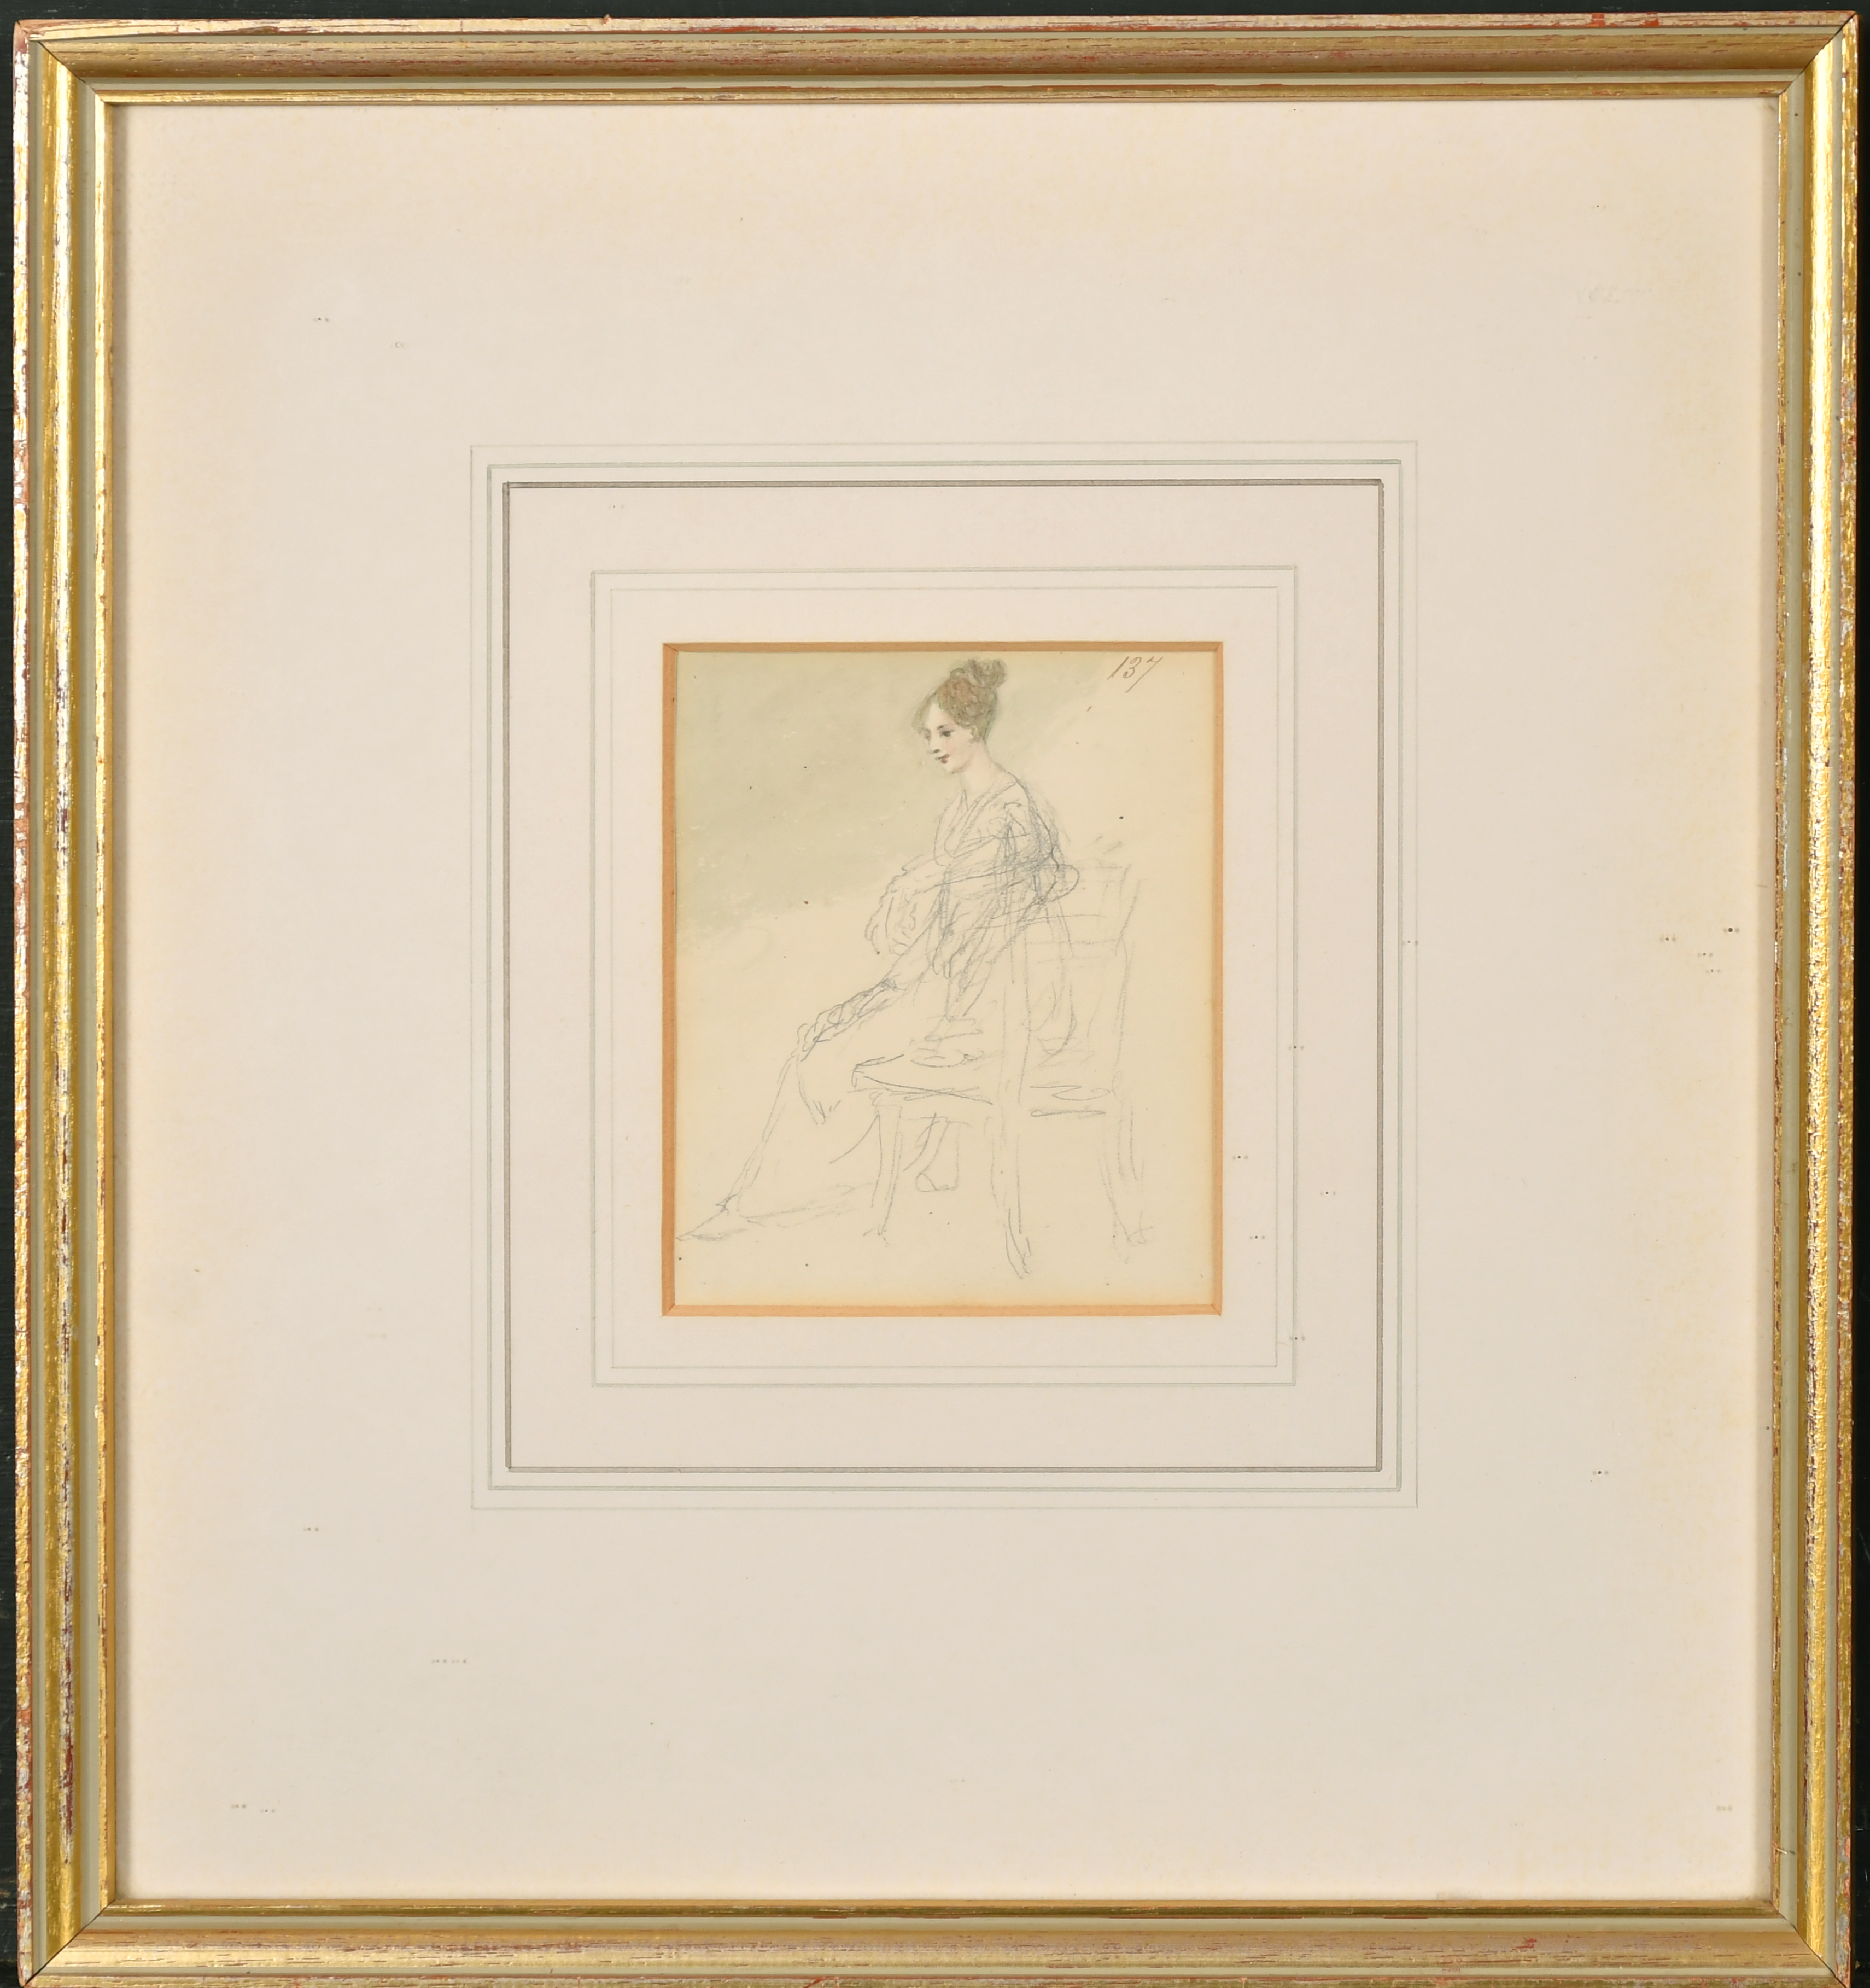 John Nixon (1750-1818) British. A Full Length Portrait of a Lady, Pencil, Numbered 189, 6.5" x 4.25" - Image 6 of 7